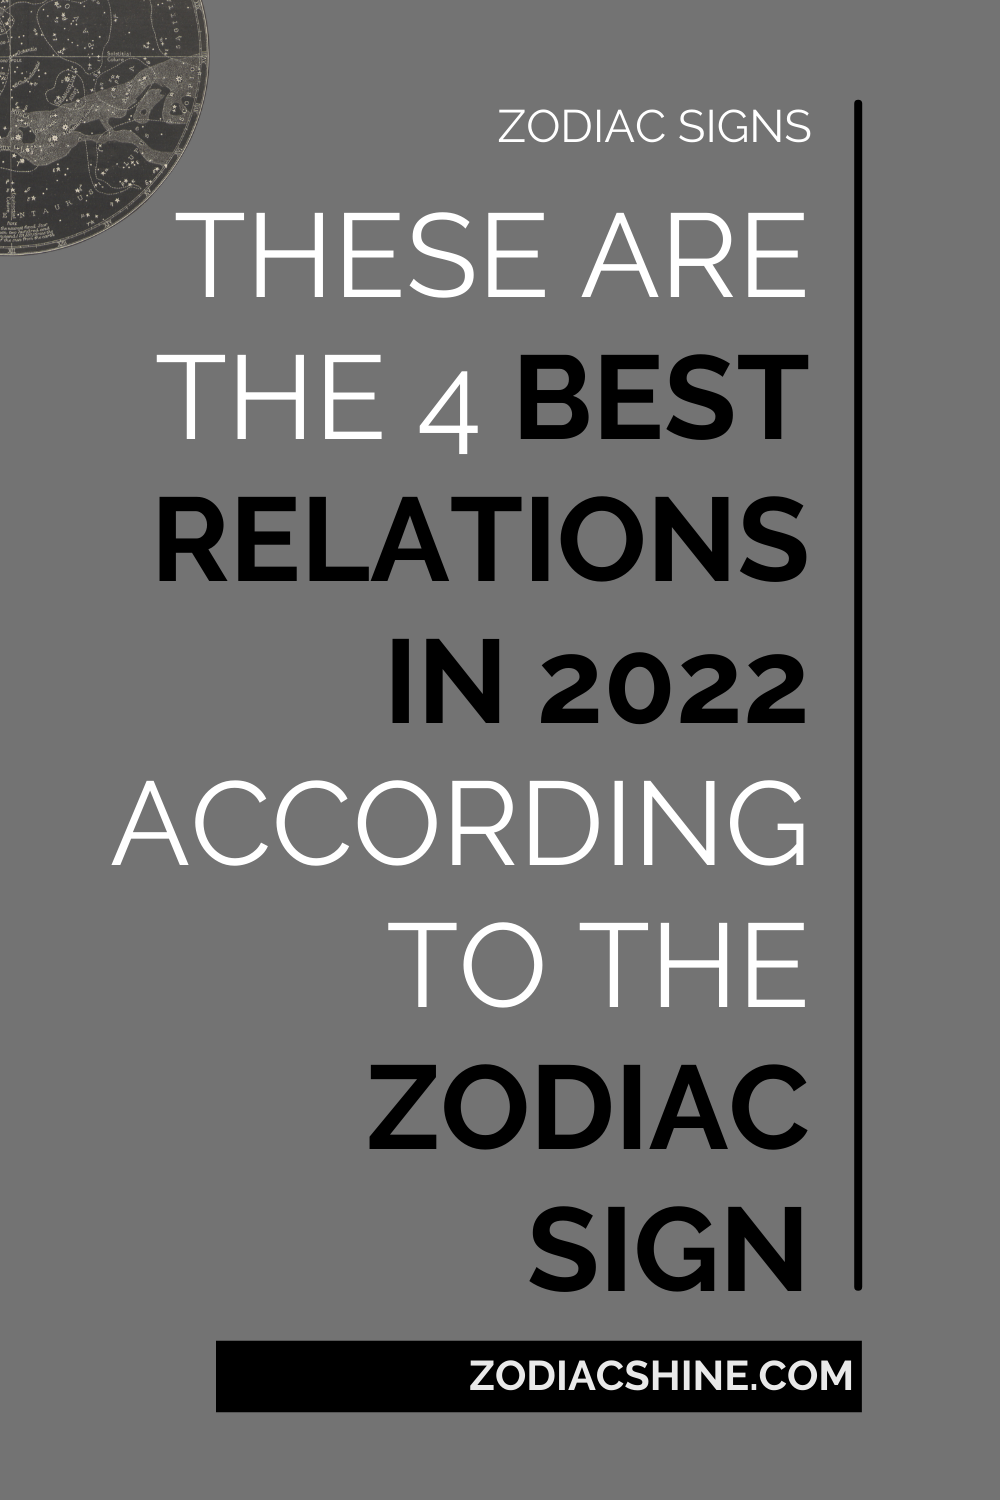 These Are The 4 Best Relations In 2022 According To The Zodiac Sign